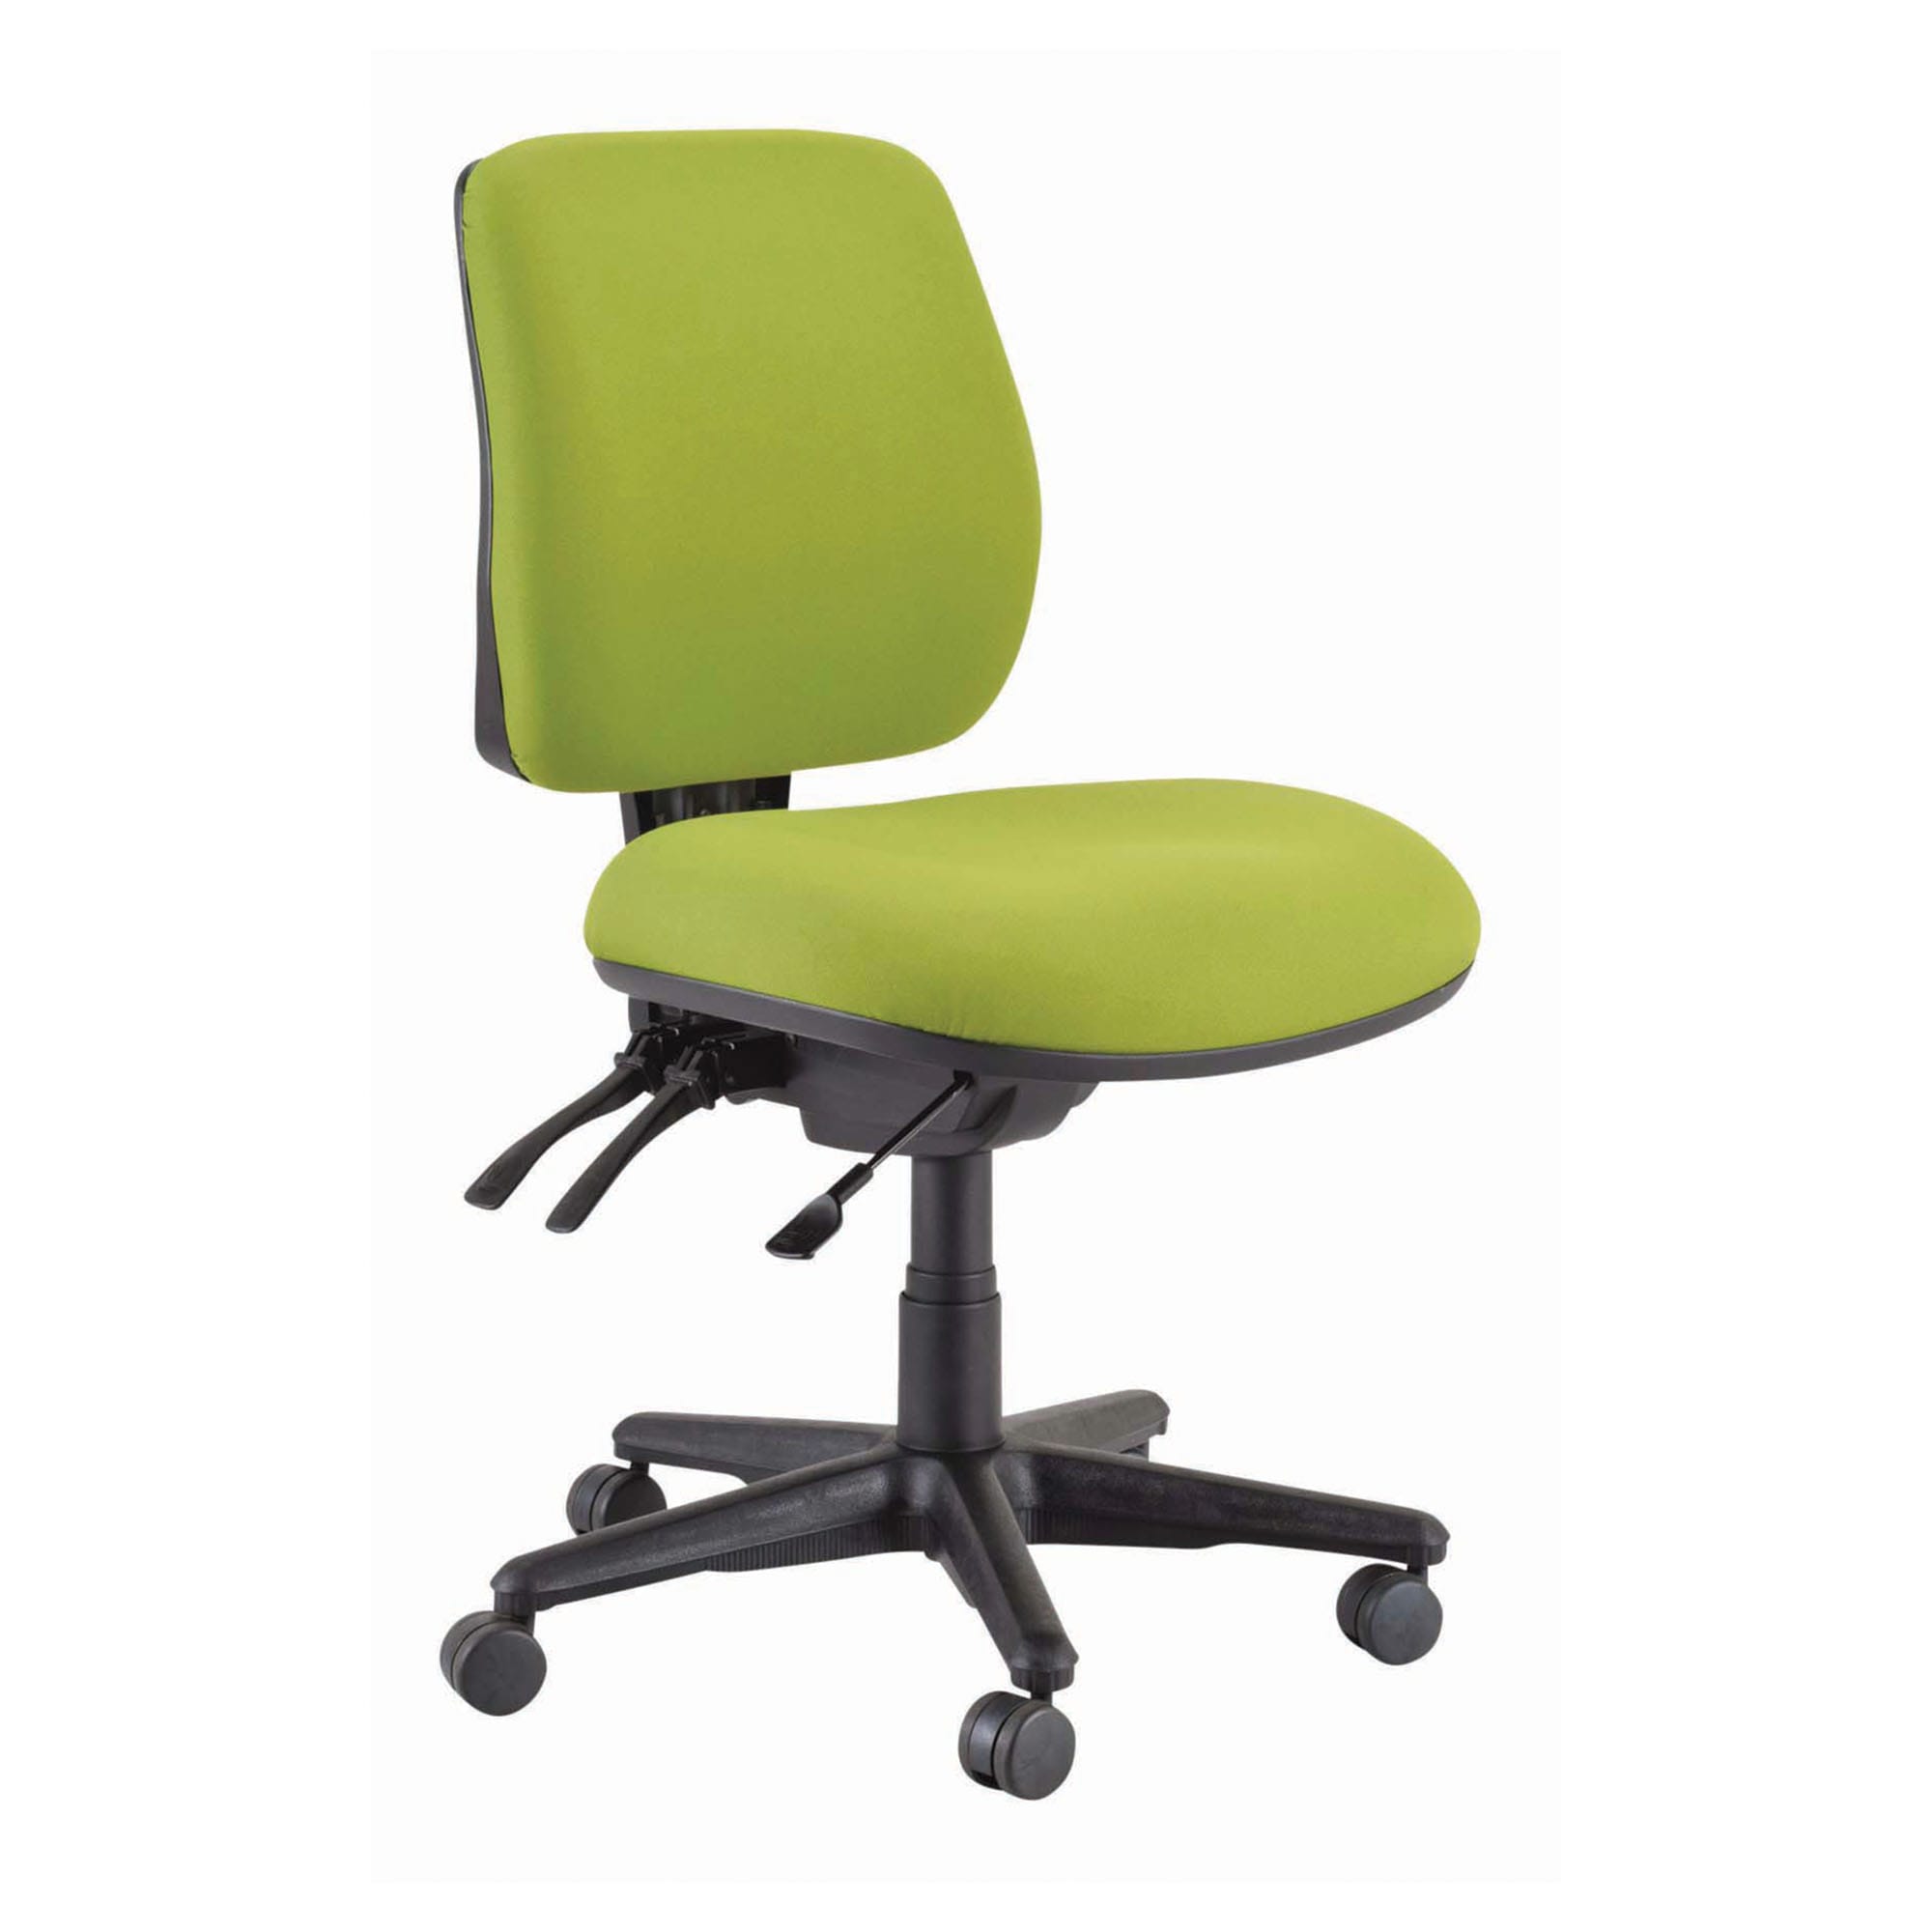 Buro Roma 3 Lever Mid Back chair in green, nylon base